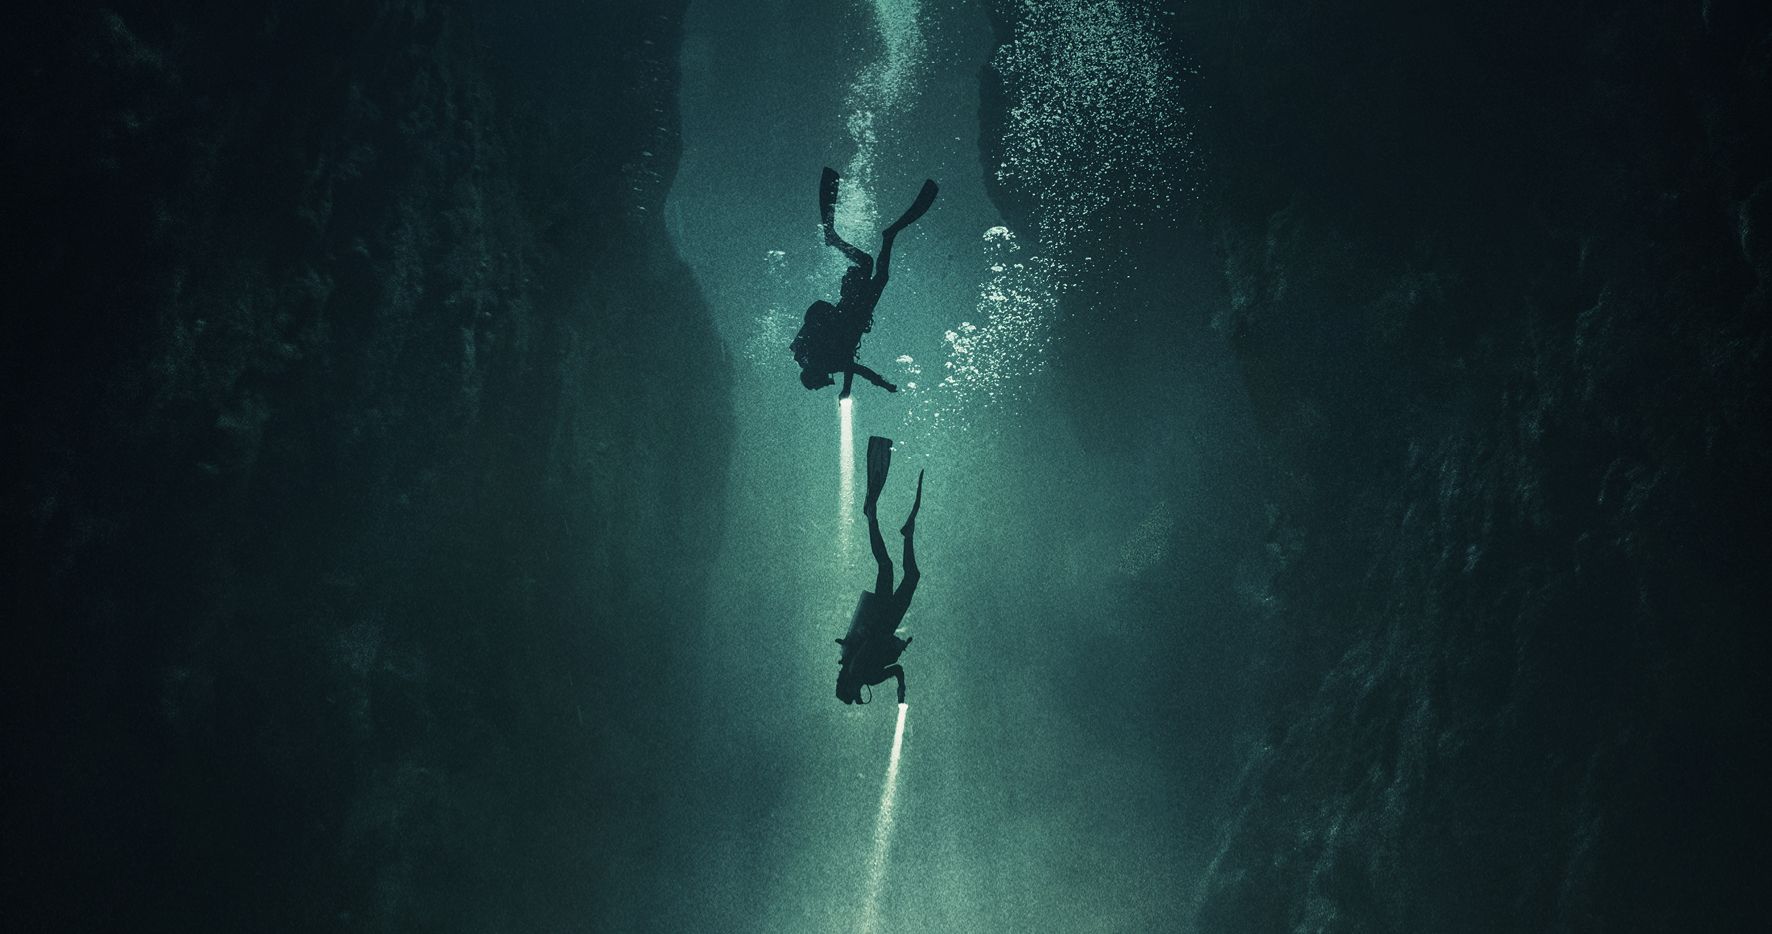 The Deep House Trailer Puts an Underwater Spin on Haunted House Horror